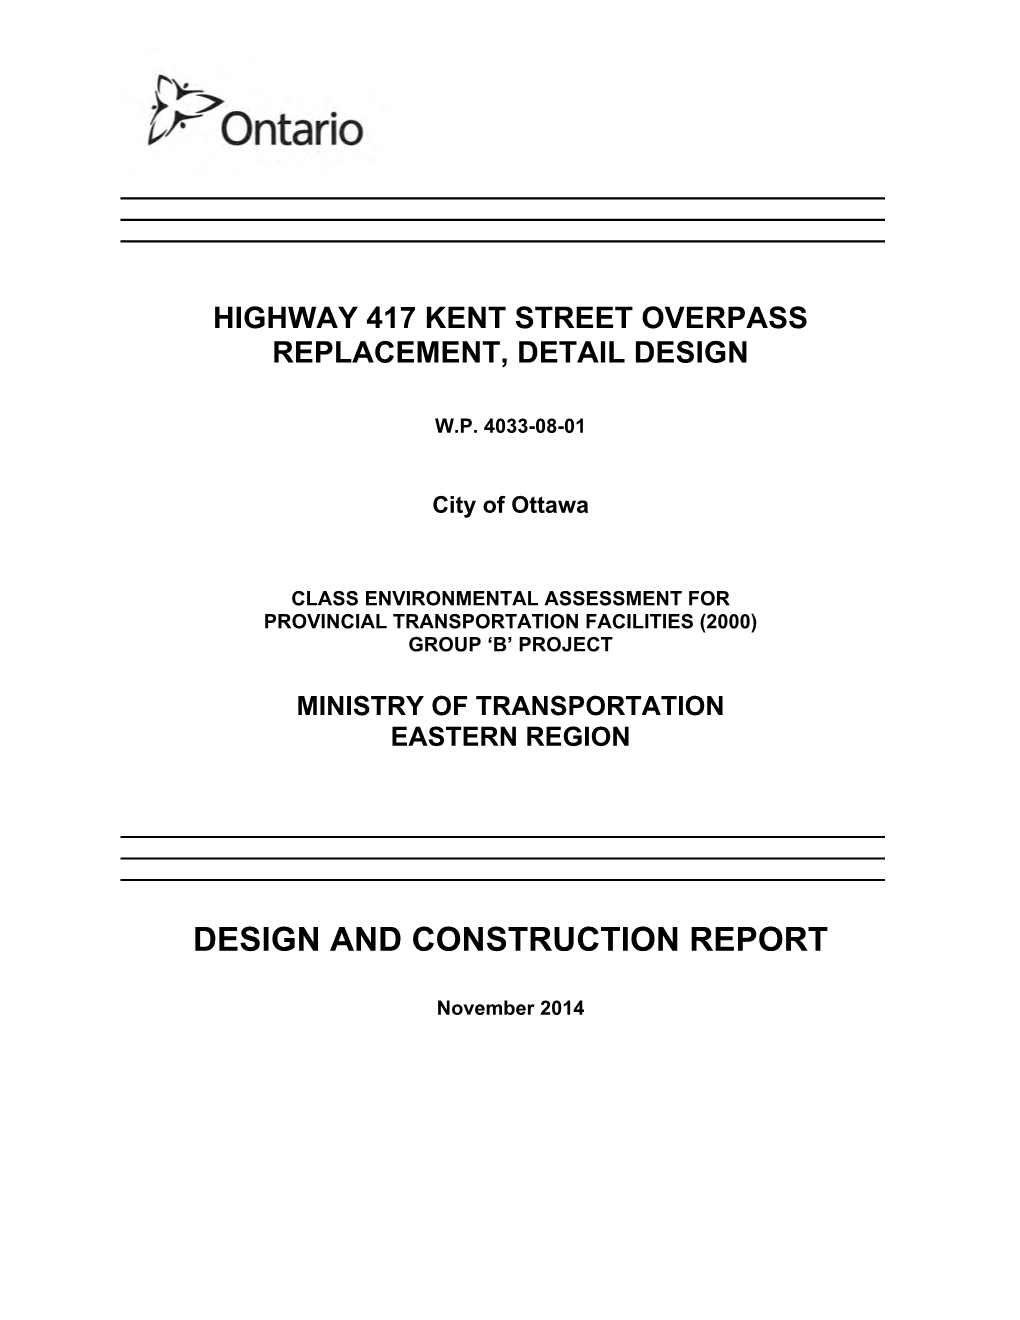 Design and Construction Report